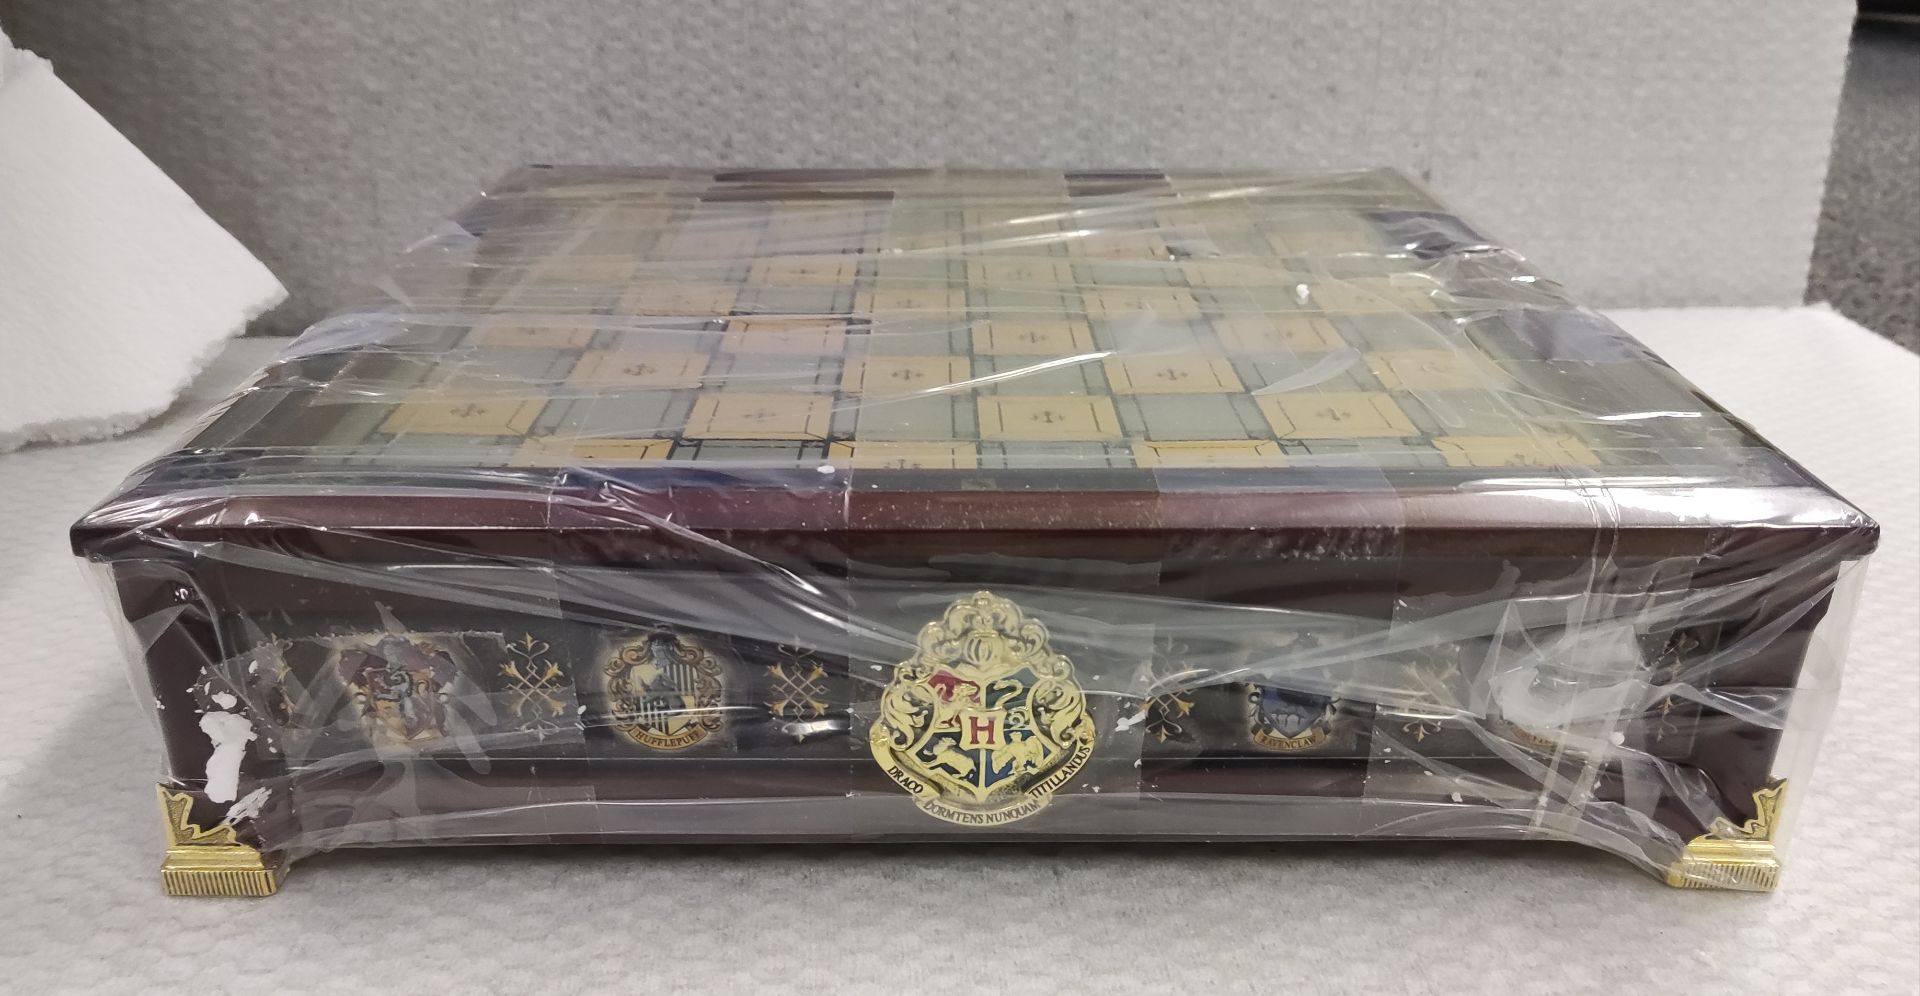 1 x Harry Potter Silver & Gold Plated Quidditch Chess Set by The Noble Collection - New/Boxed - Image 9 of 11